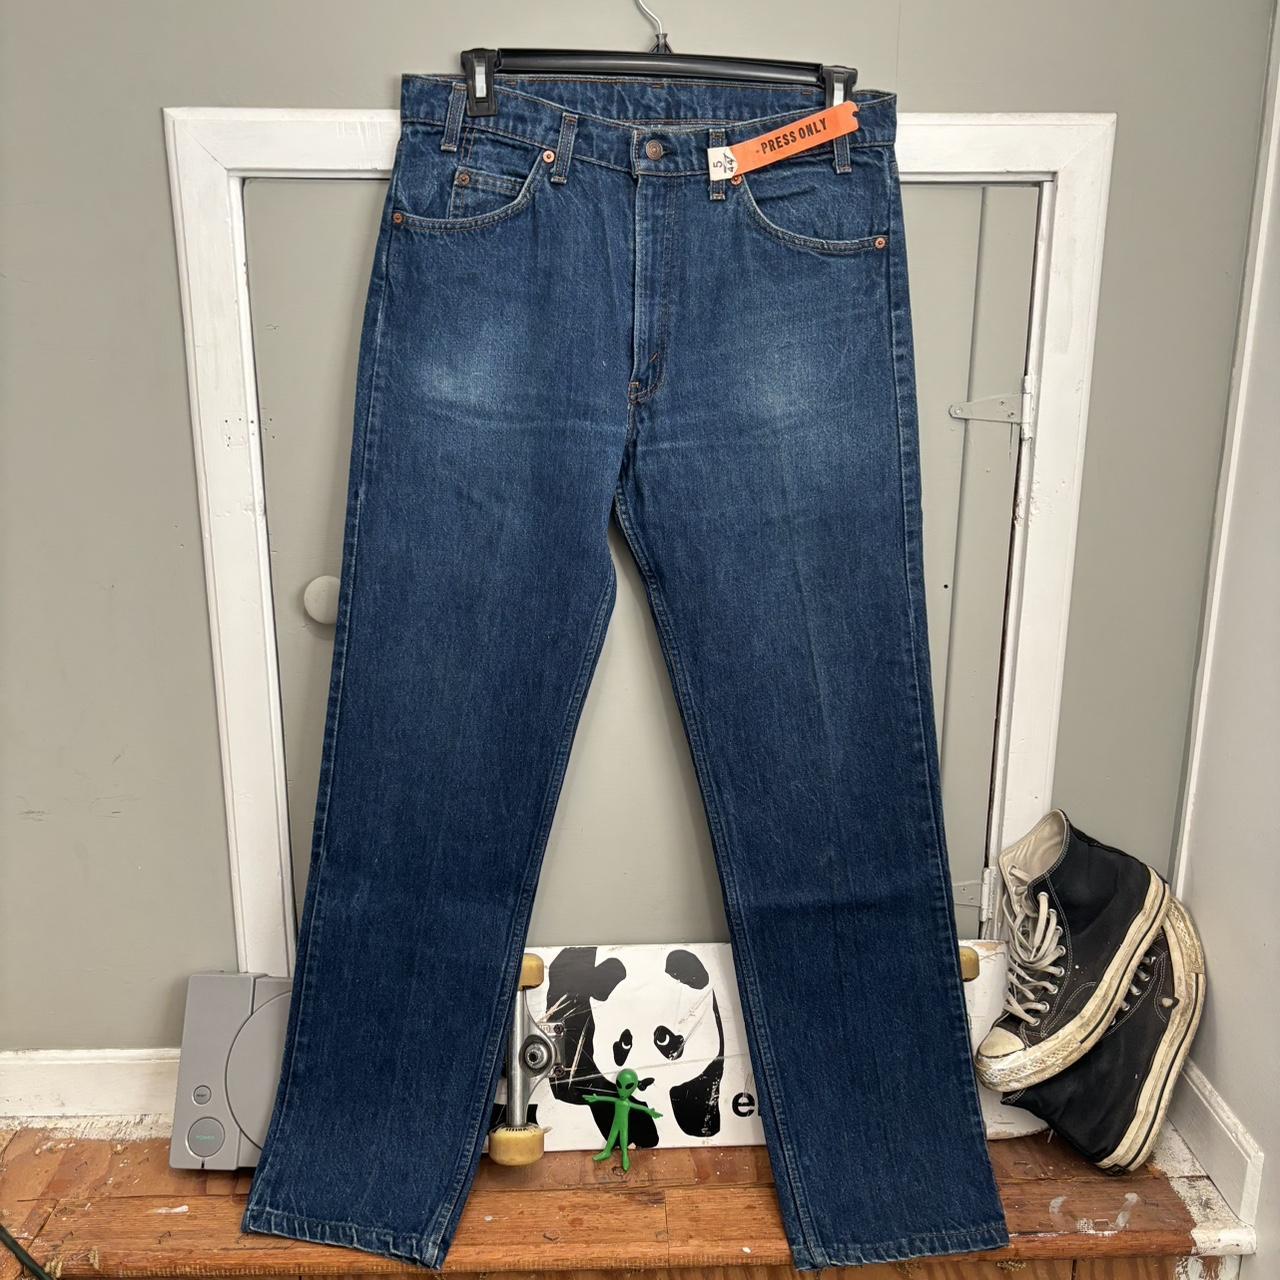 1984 Levi’s 505 orange tab jeans made in the USA - Depop